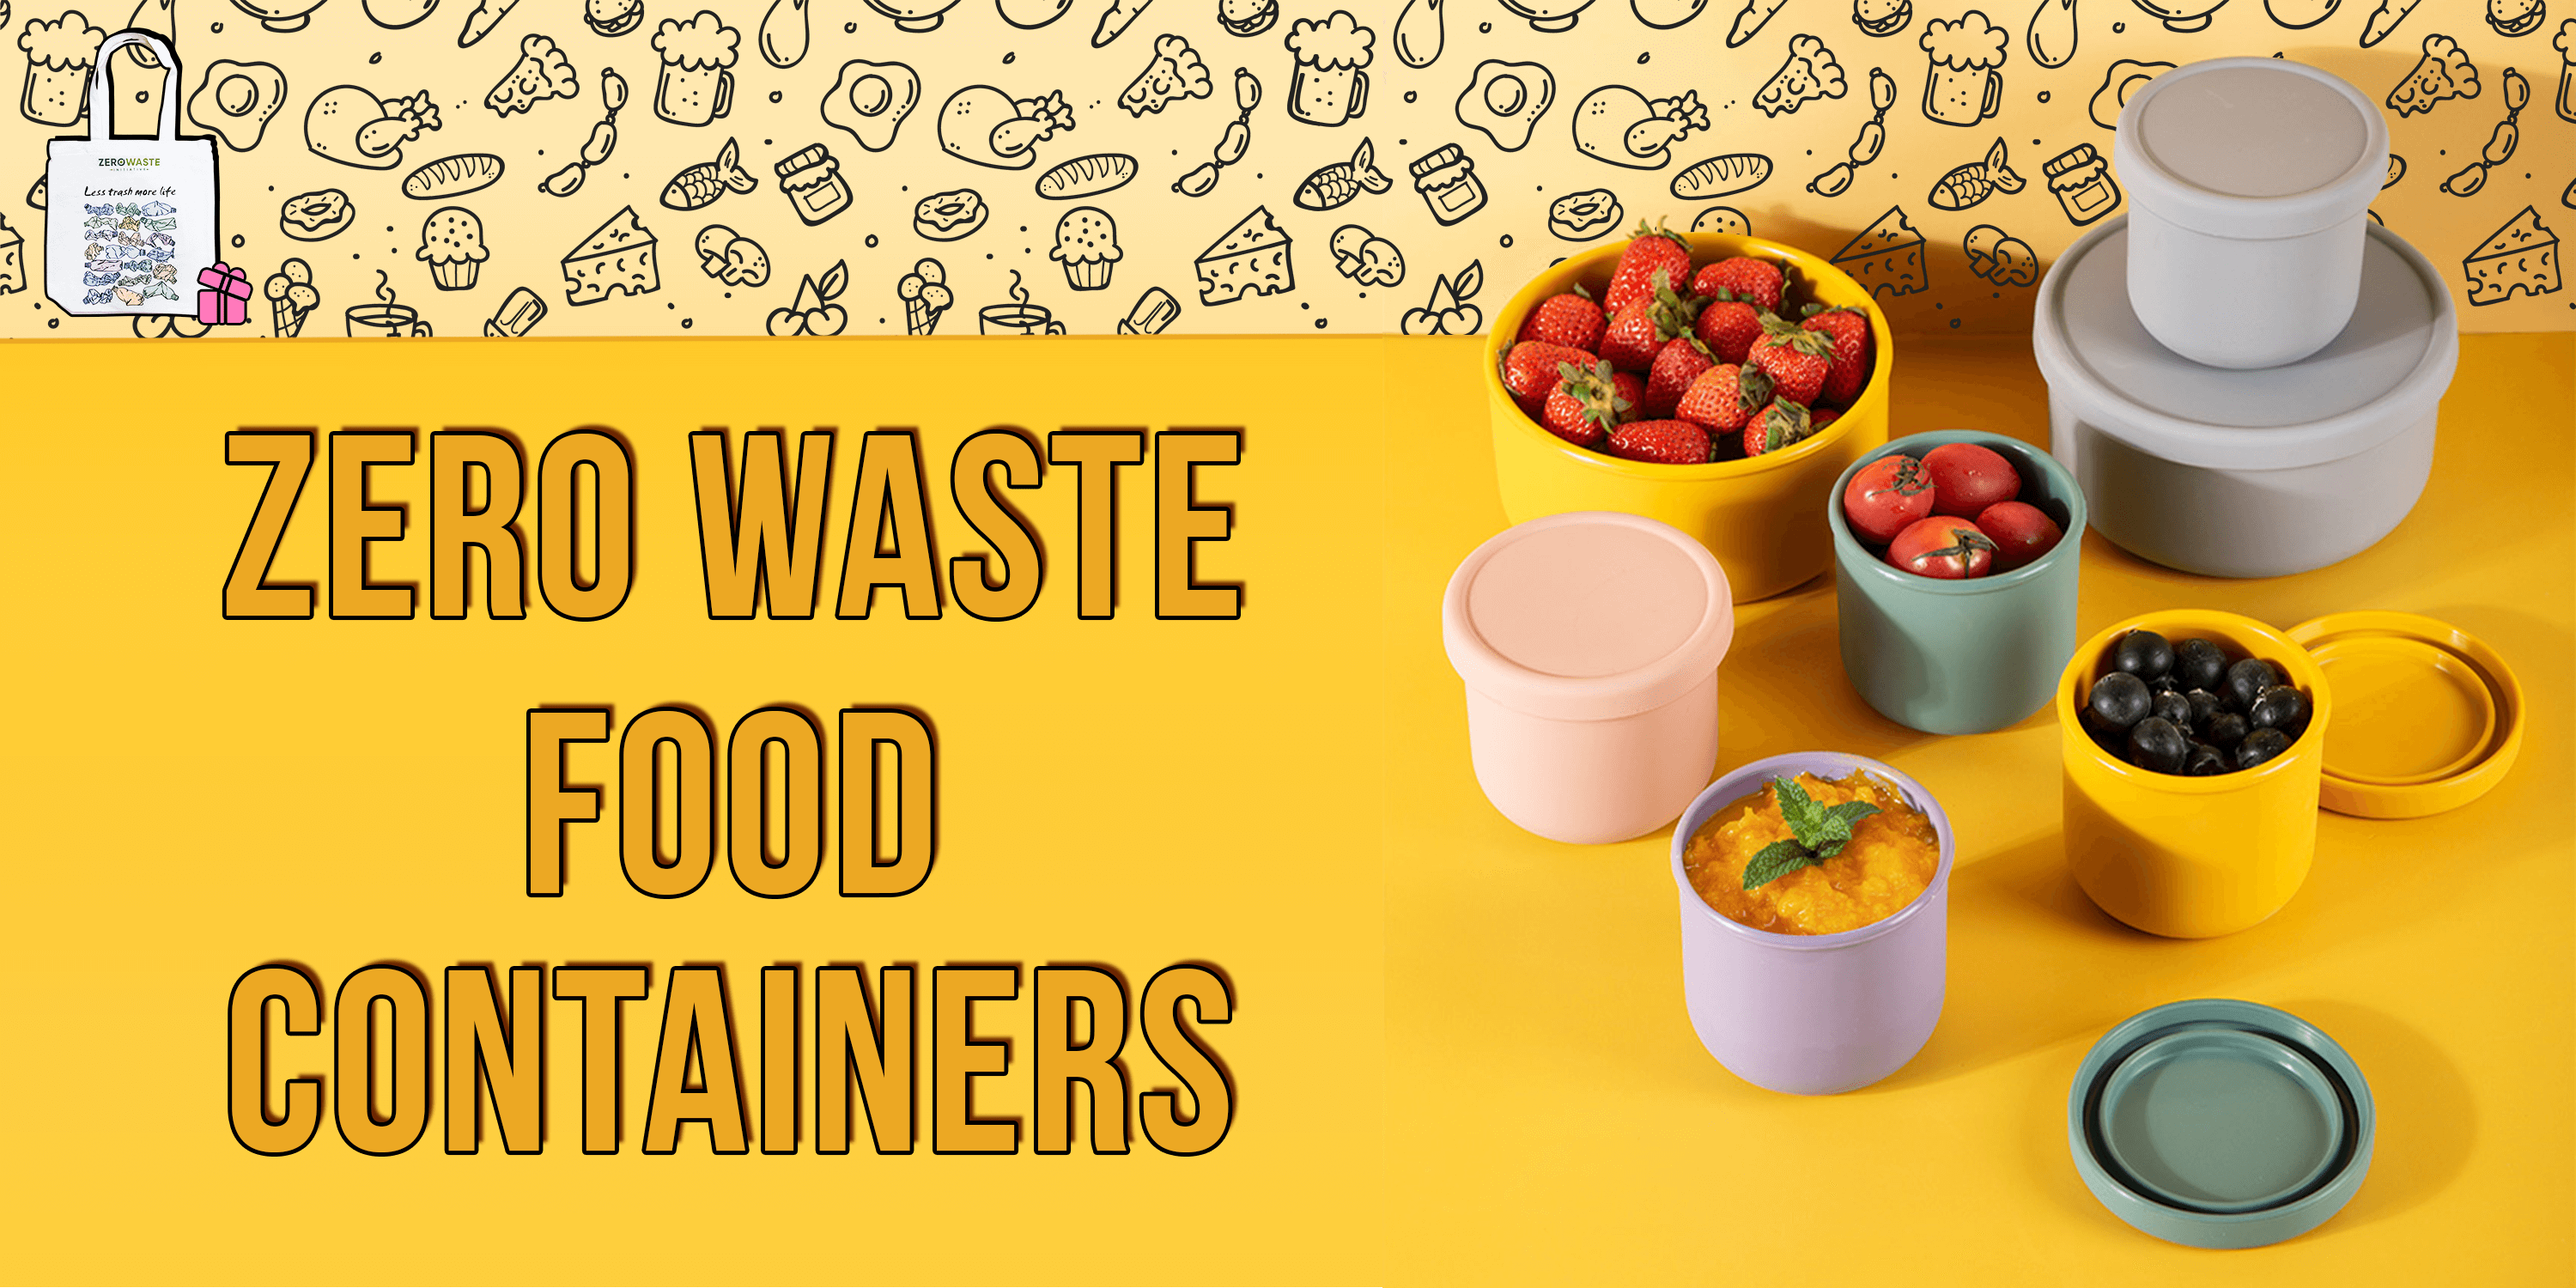 ZERO WASTE FOOD CONTAINERS